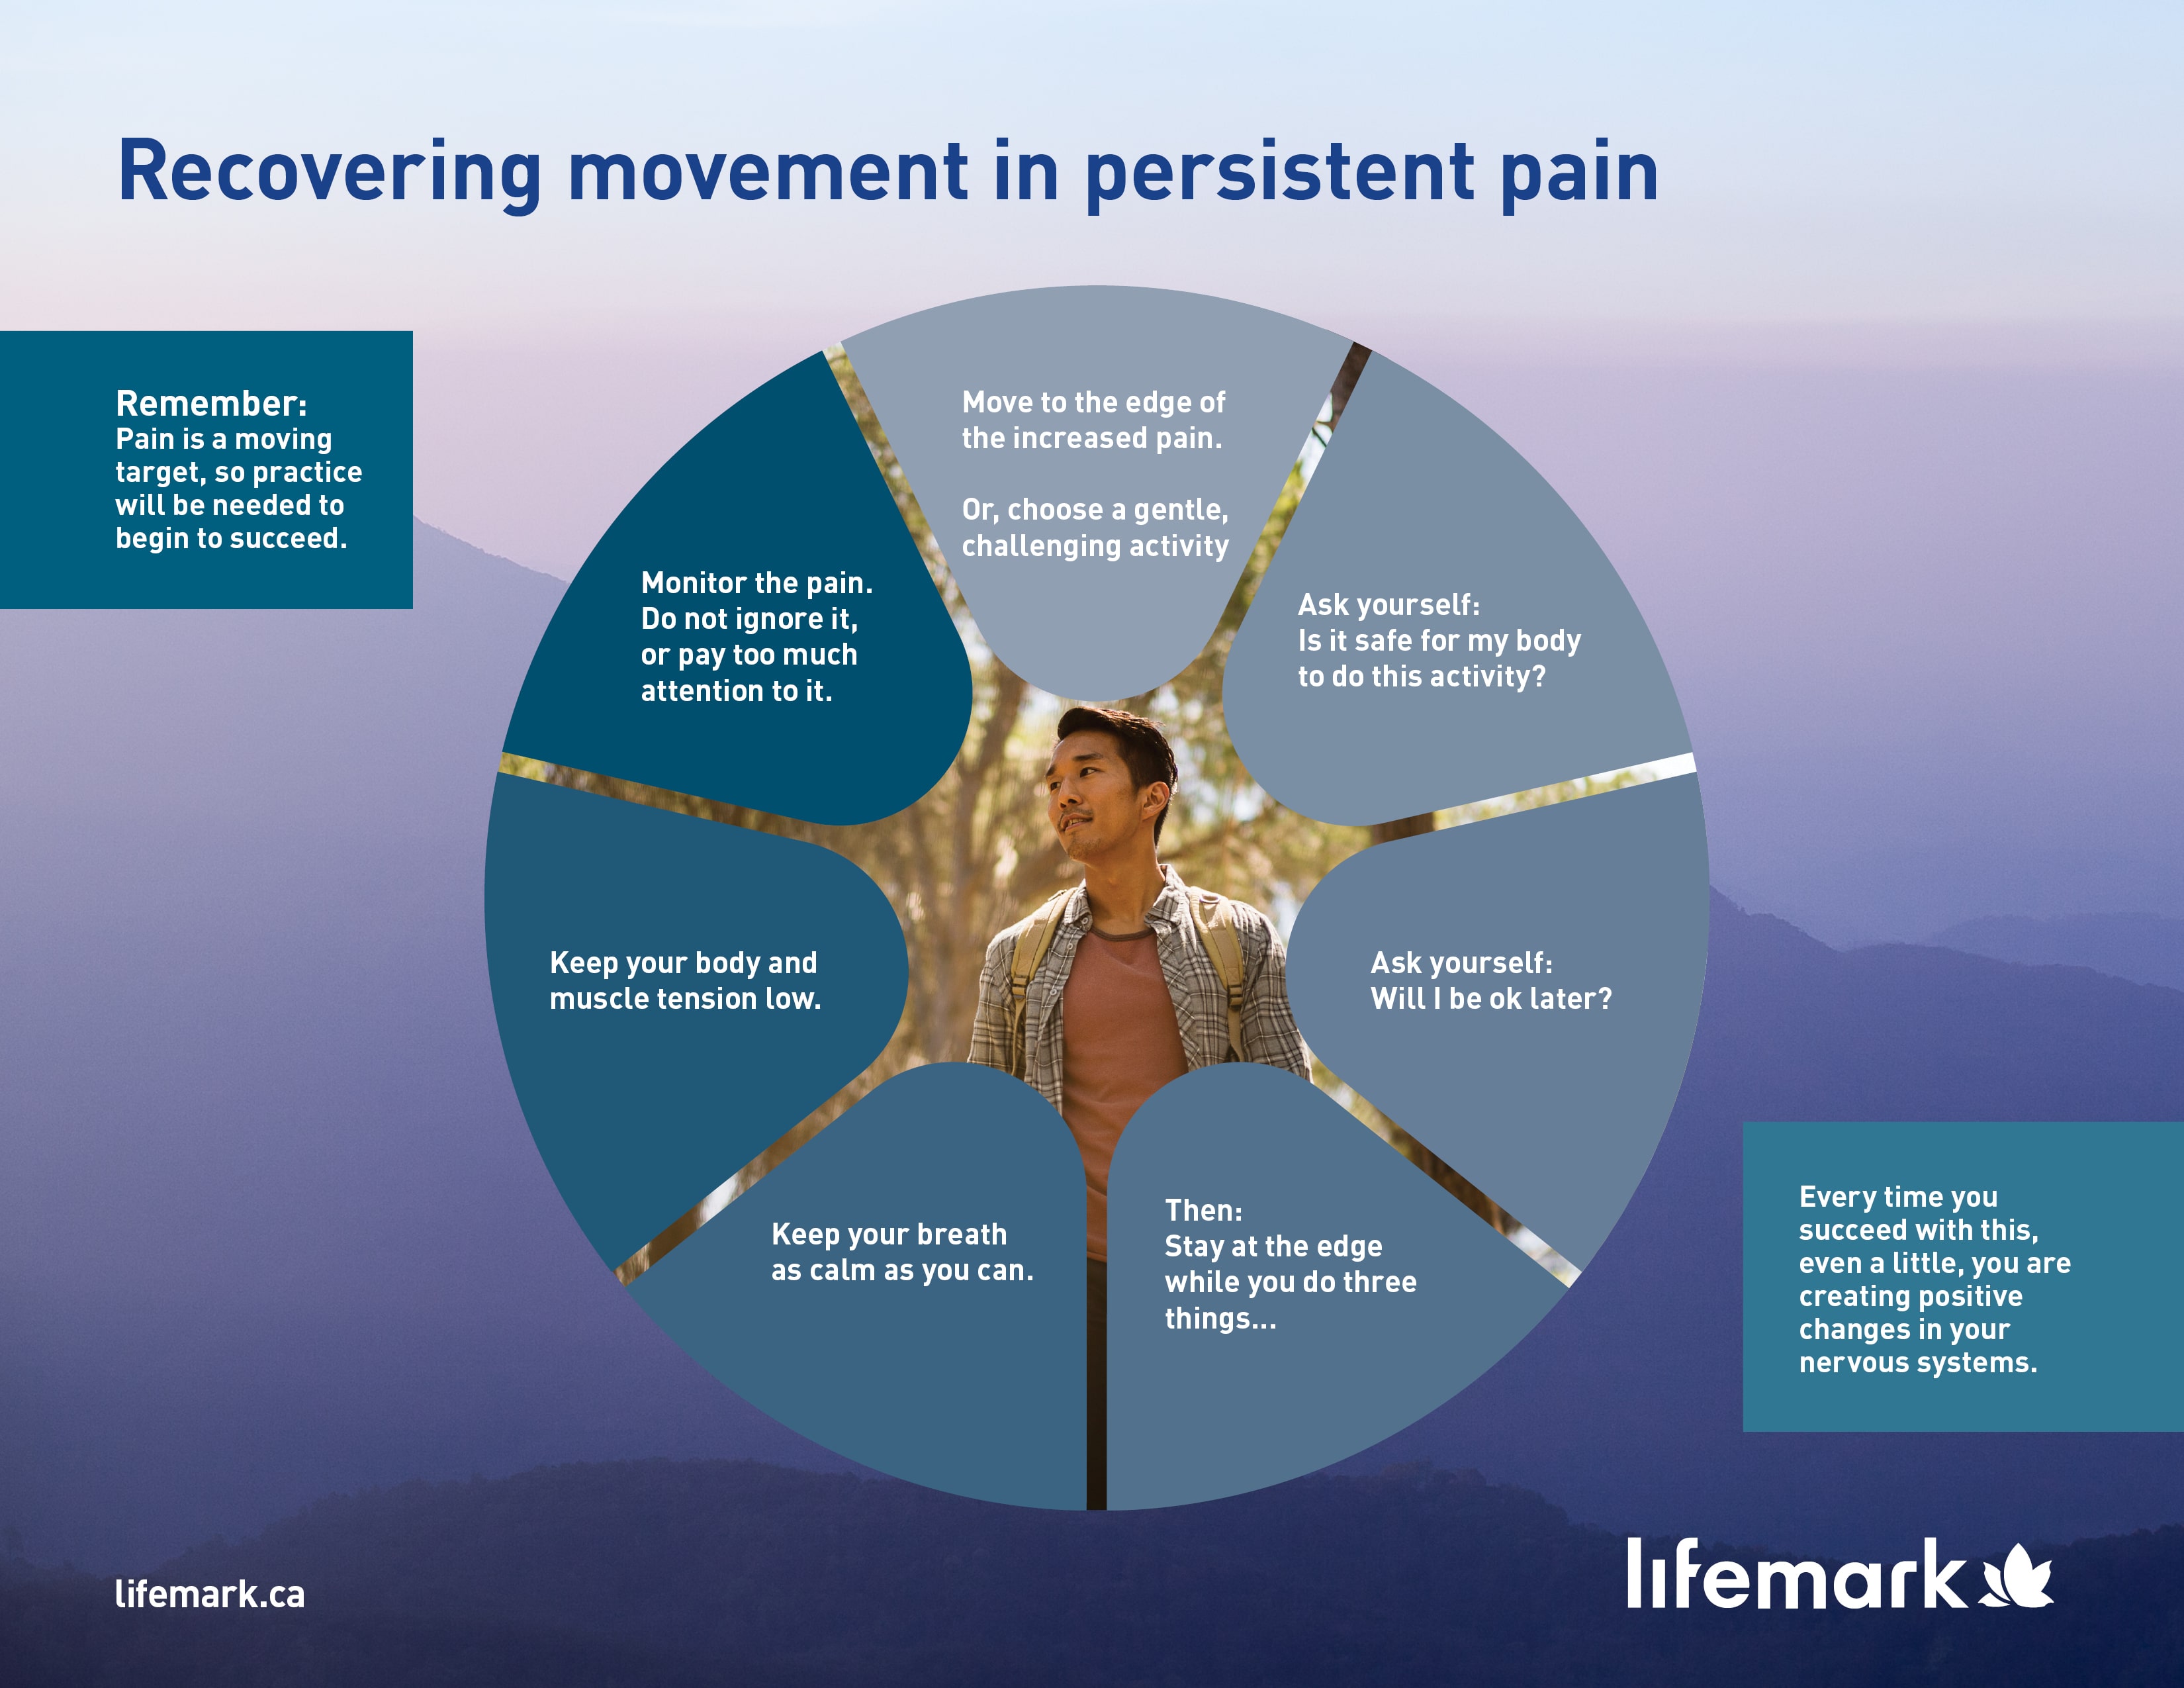 A poster with various steps for recovering movement in persistent pain